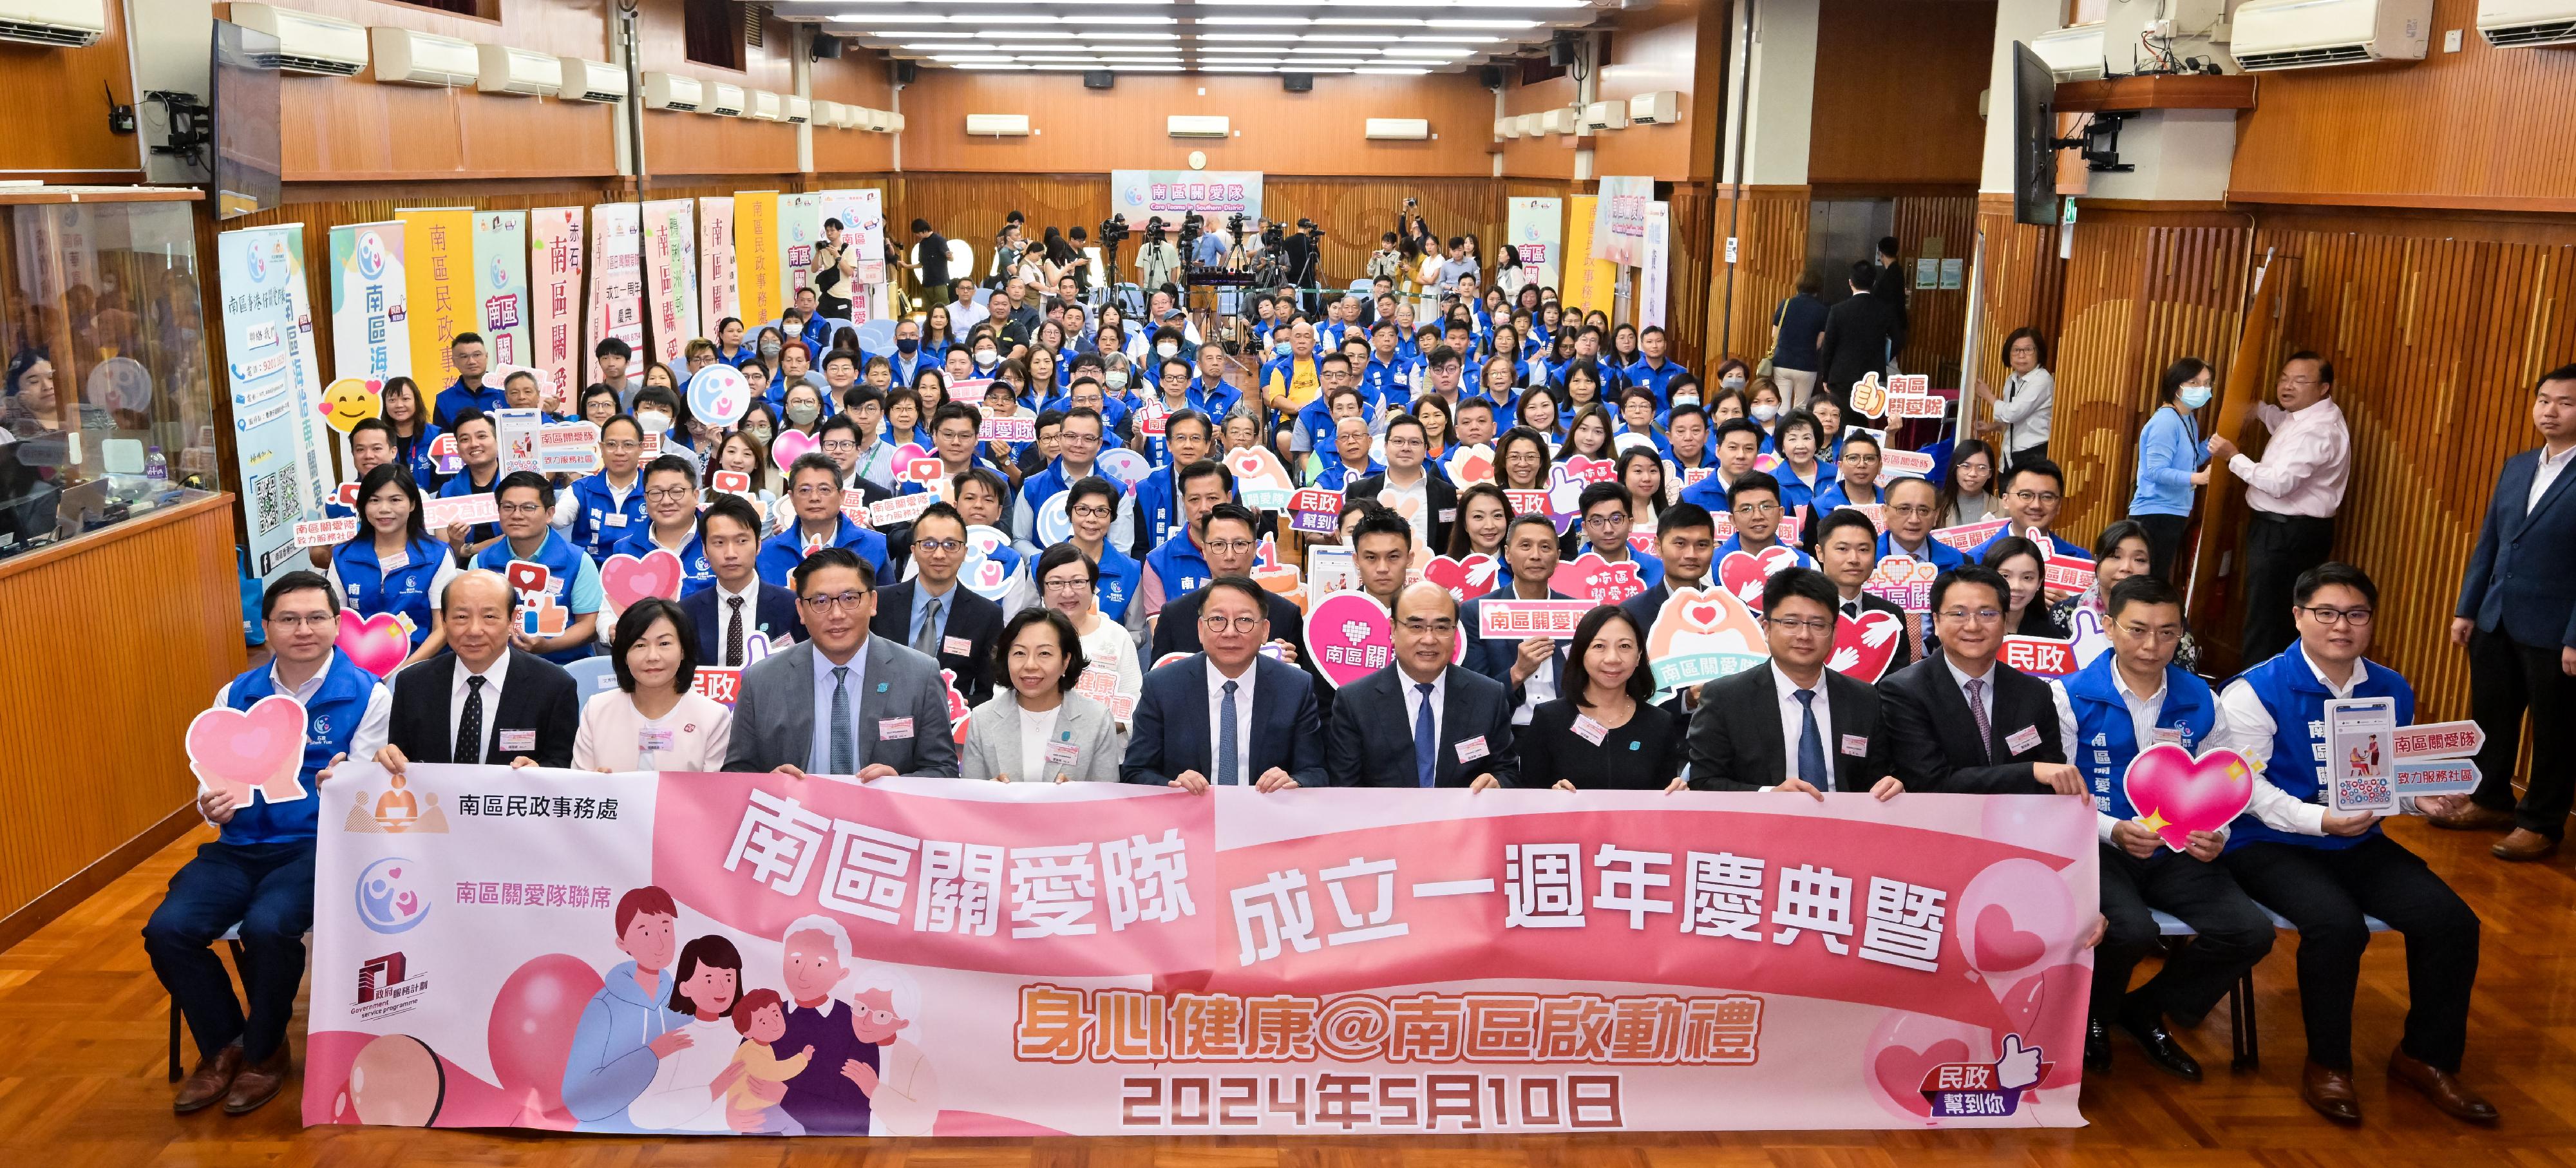 The Chief Secretary for Administration, Mr Chan Kwok-ki, attended the Care Teams in Southern District - First Anniversary and Healthy Life Launching Ceremony today (May 10). Photo shows (first row, from left) Co-convenor of the District Services and Community Care Teams in the Southern District Mr Chu Lap-wai; the President of the Hong Kong Southern District Community Care and Development Funds and the Chairman of the Hong Kong Southern District Community Association , Mr Chan Nam-po; the Director of Home Affairs, Mrs Alice Cheung; the Under Secretary for Home and Youth Affairs, Mr Clarence Leung; the Secretary for Home and Youth Affairs, Miss Alice Mak; Mr Chan Kwok-ki; the Director-General of the Hong Kong Island Sub-office of the Liaison Office of the Central People's Government in the Hong Kong Special Administrative Region (HKSAR), Mr Xue Huijun; the Permanent Secretary for Home and Youth Affairs, Ms Shirley Lam; the Deputy Director-General of the Hong Kong Island Sub-office of the Liaison Office of the Central People's Government in the HKSAR, Mr Wang Hui; the District Officer (Southern), Mr Francis Cheng; the Principal Chairman of the Hong Kong Southern District Community Care and Development Funds, Mr Xue Boran; Co-vice Convenor of the District Services and Community Care Teams in the Southern District Mr Pang Siu-kei, and other guests at the event.